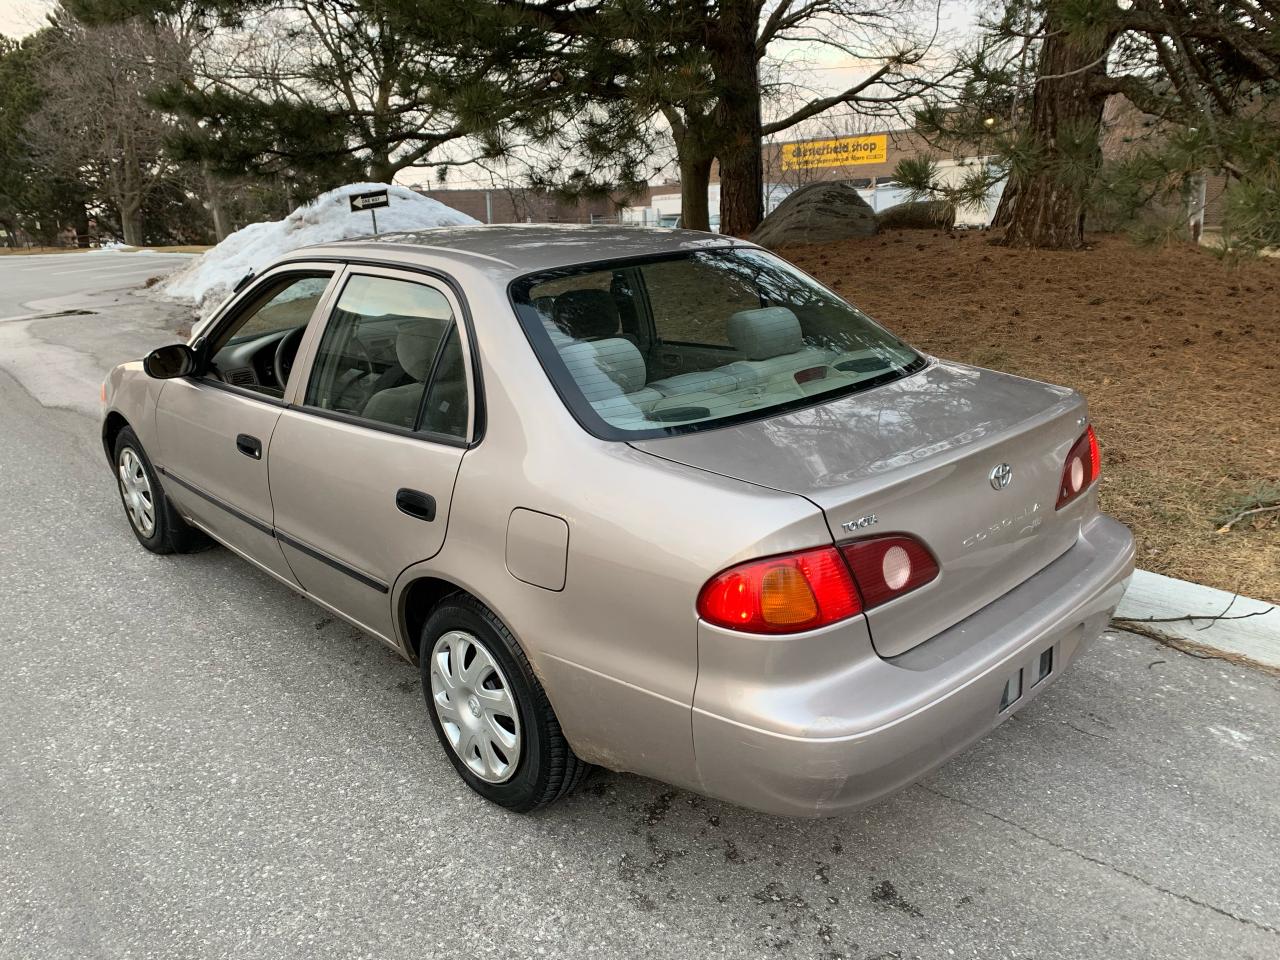 2002 Toyota Corolla CE PLUS-ONLY 162,557KMS! 1 LOCAL OWNER! NO CLAIMS! - Photo #6